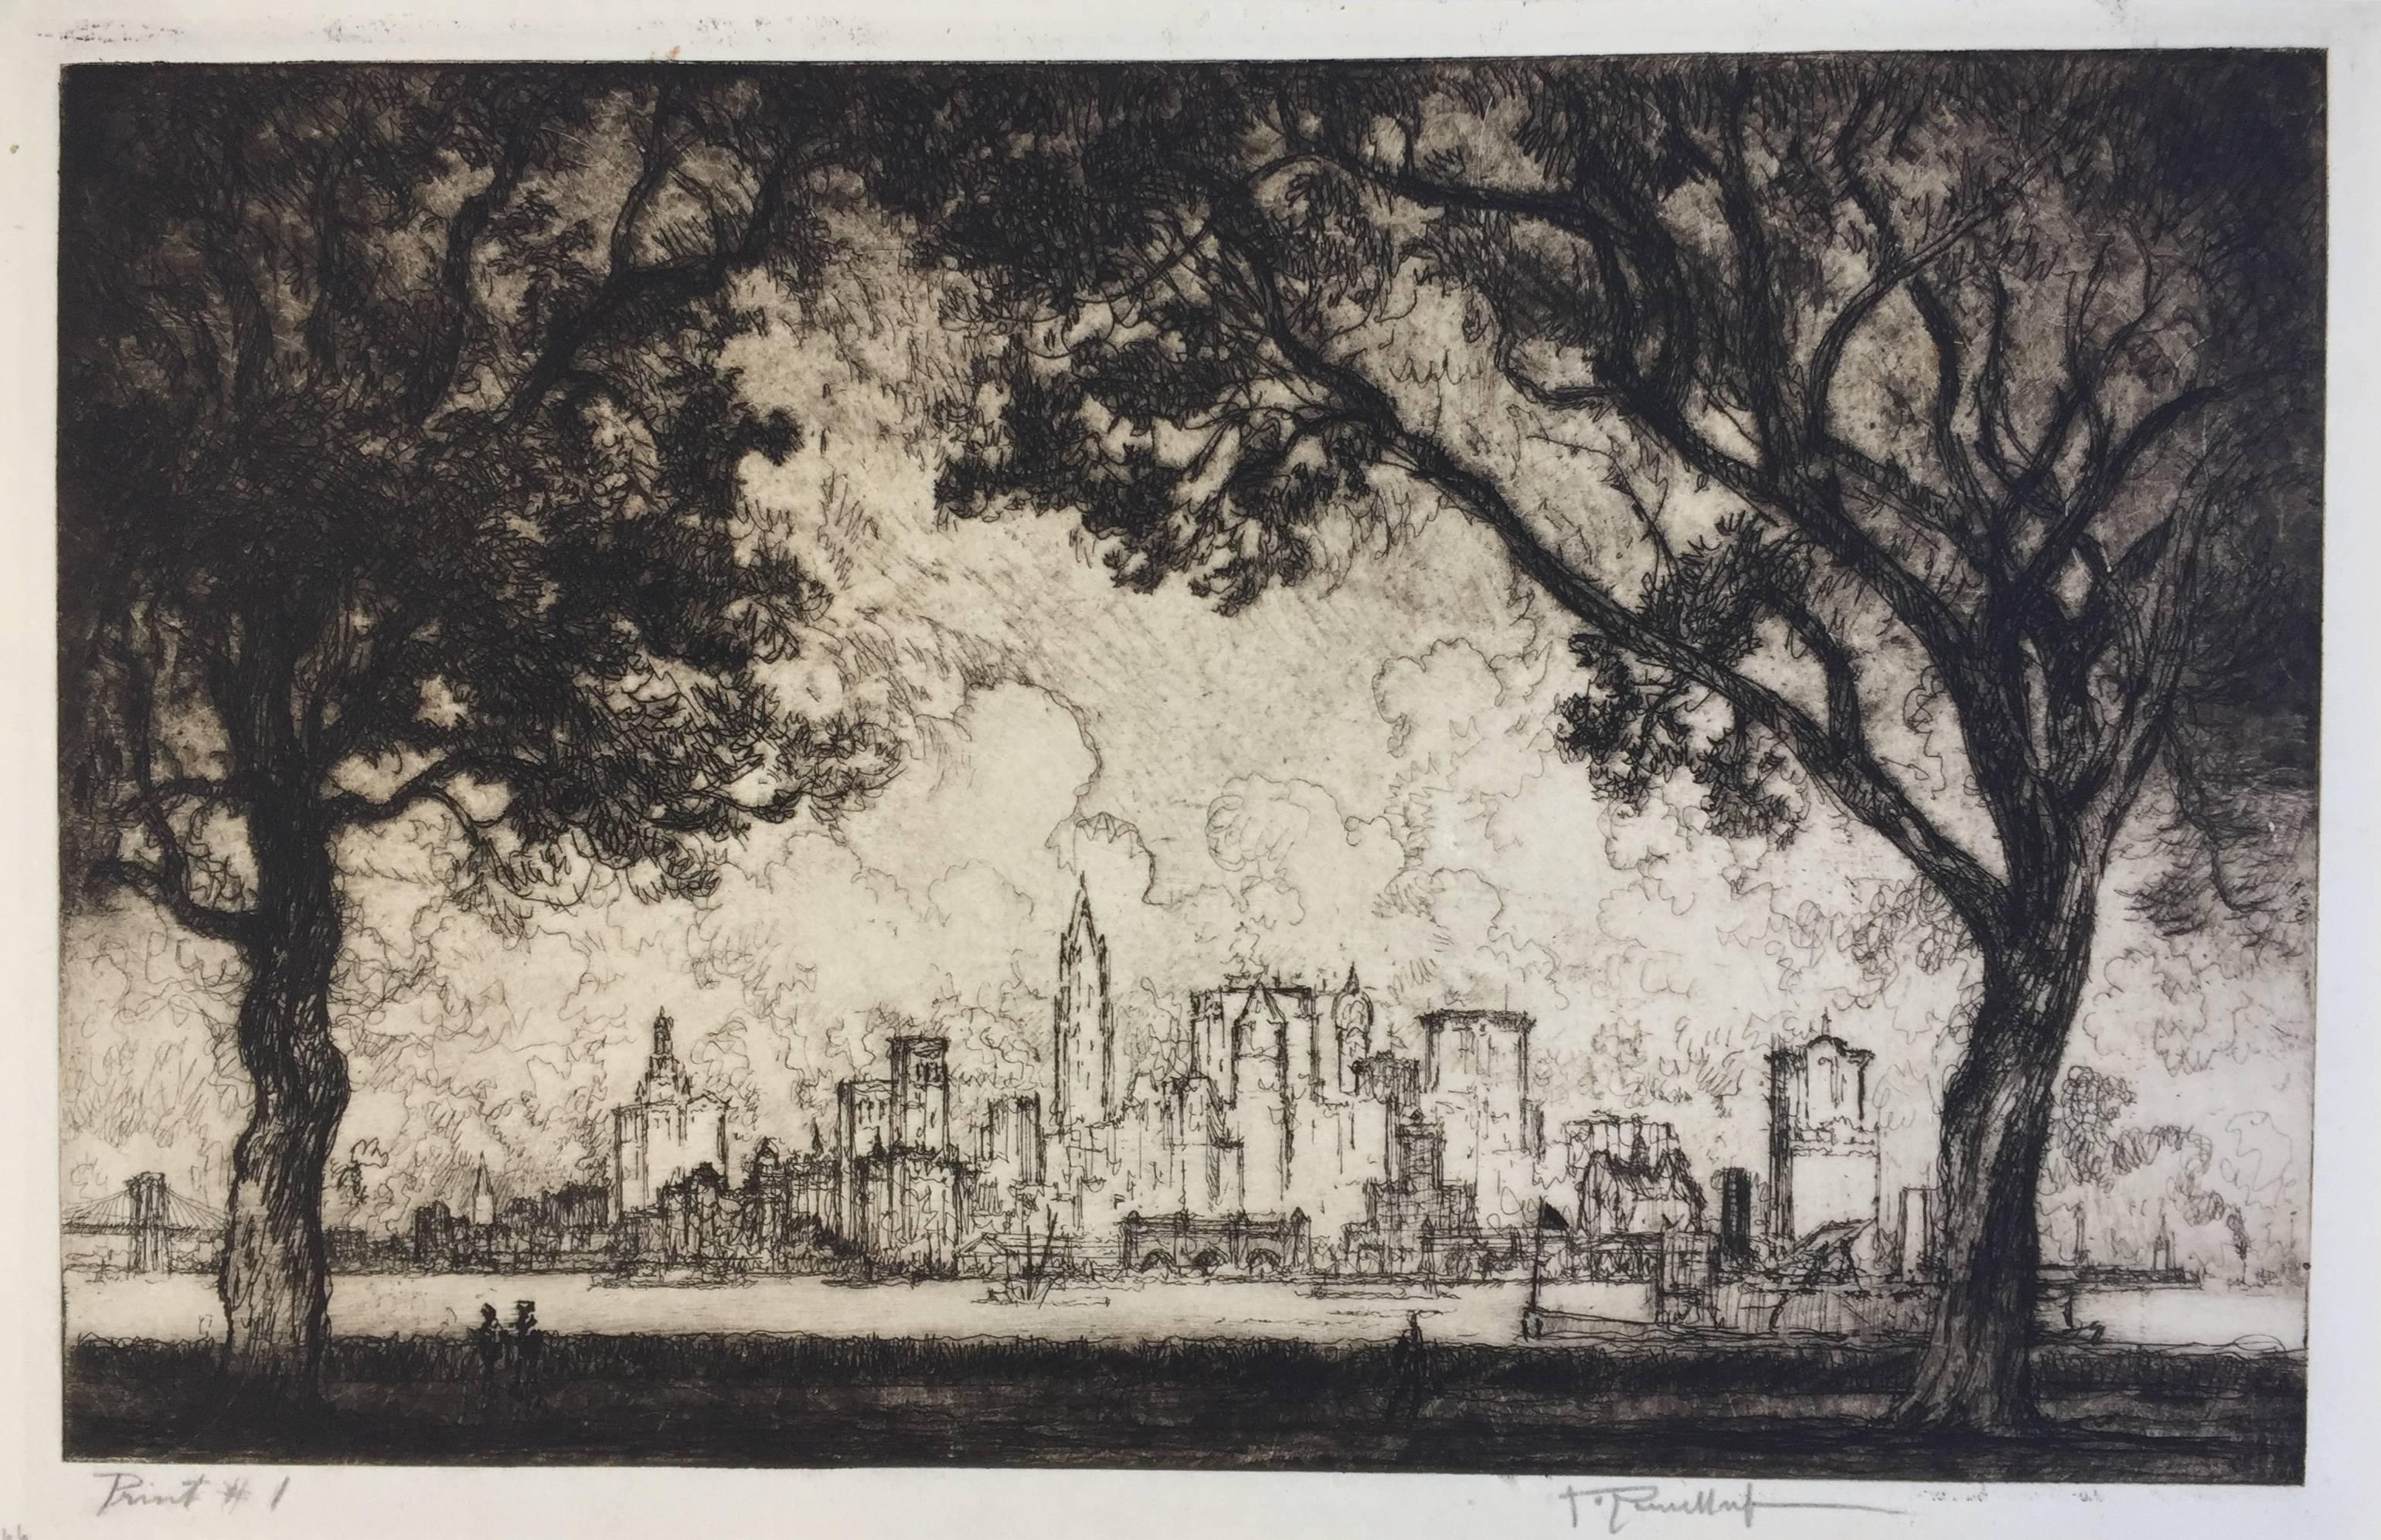 NEW YORK FROM GOVERNOR'S ISLAND - American Impressionist Print by Joseph Pennell